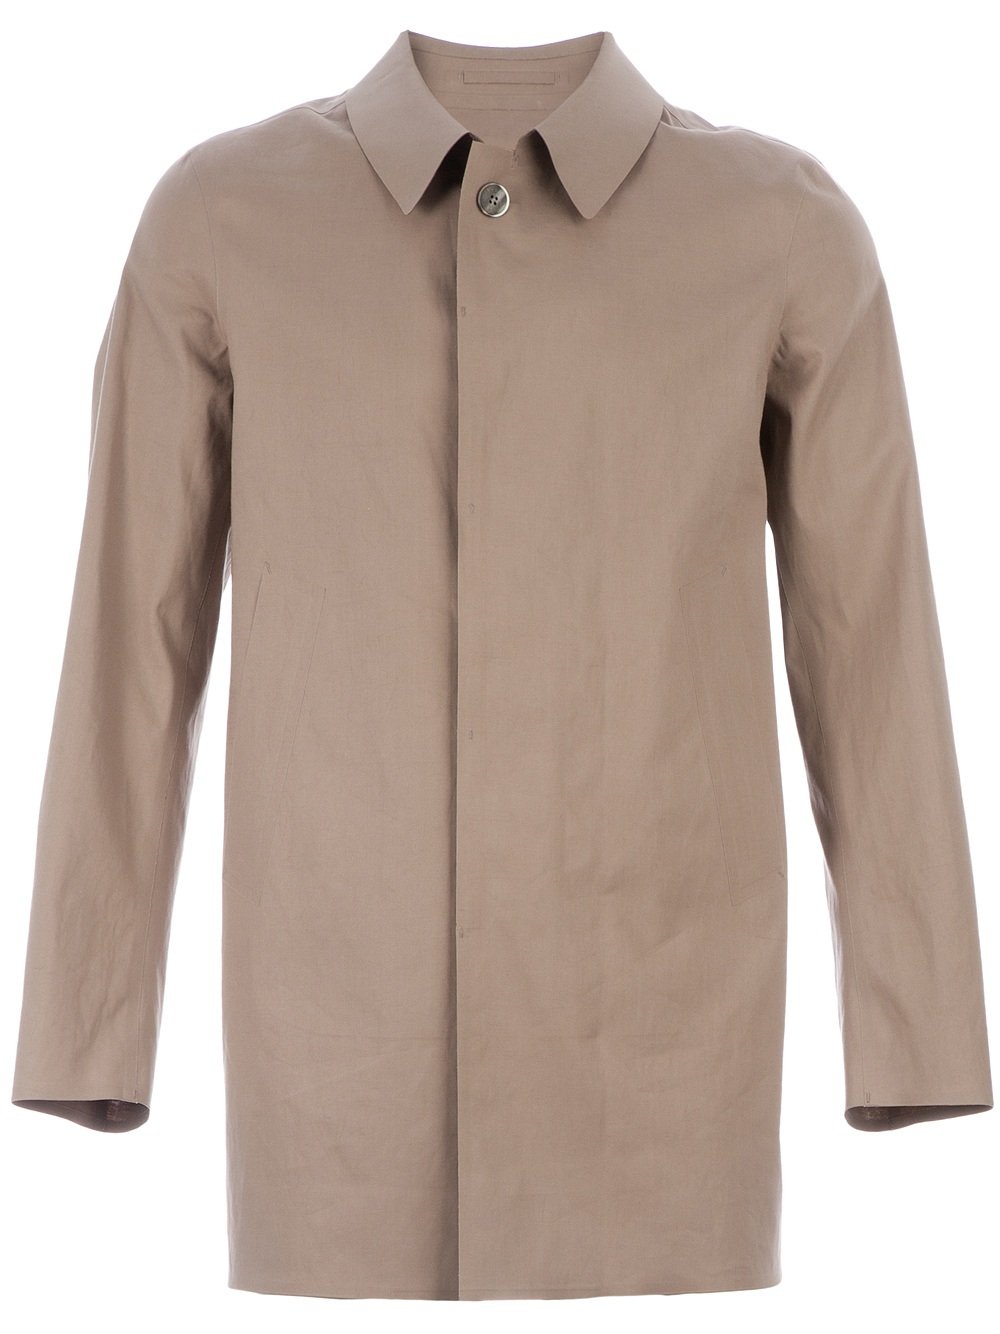 herno-brown-button-up-raincoat-product-1-10950731-0-618460446-normal.jpeg